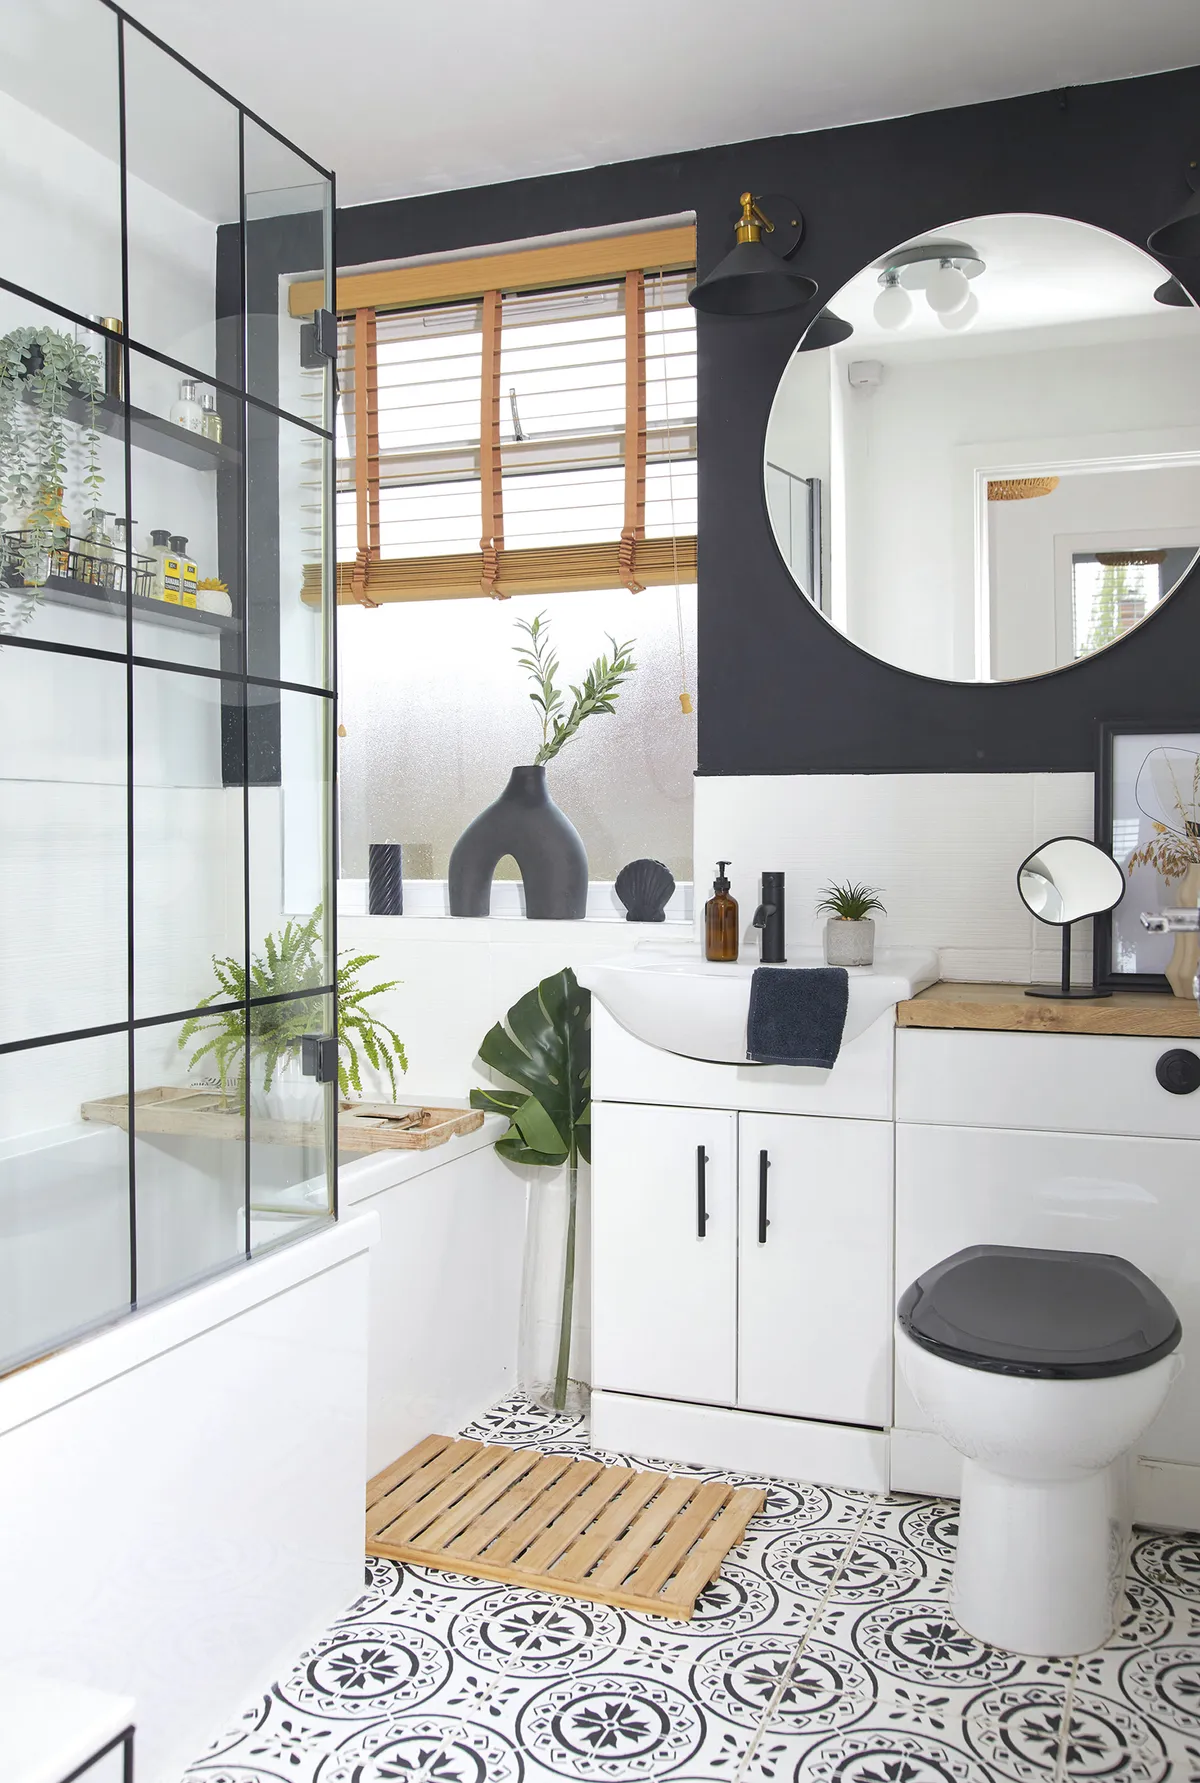 ‘I painted the shower screen black and then used electrical tape to make it look like a Crittall-style screen. I added the black loo seat to finish the look’